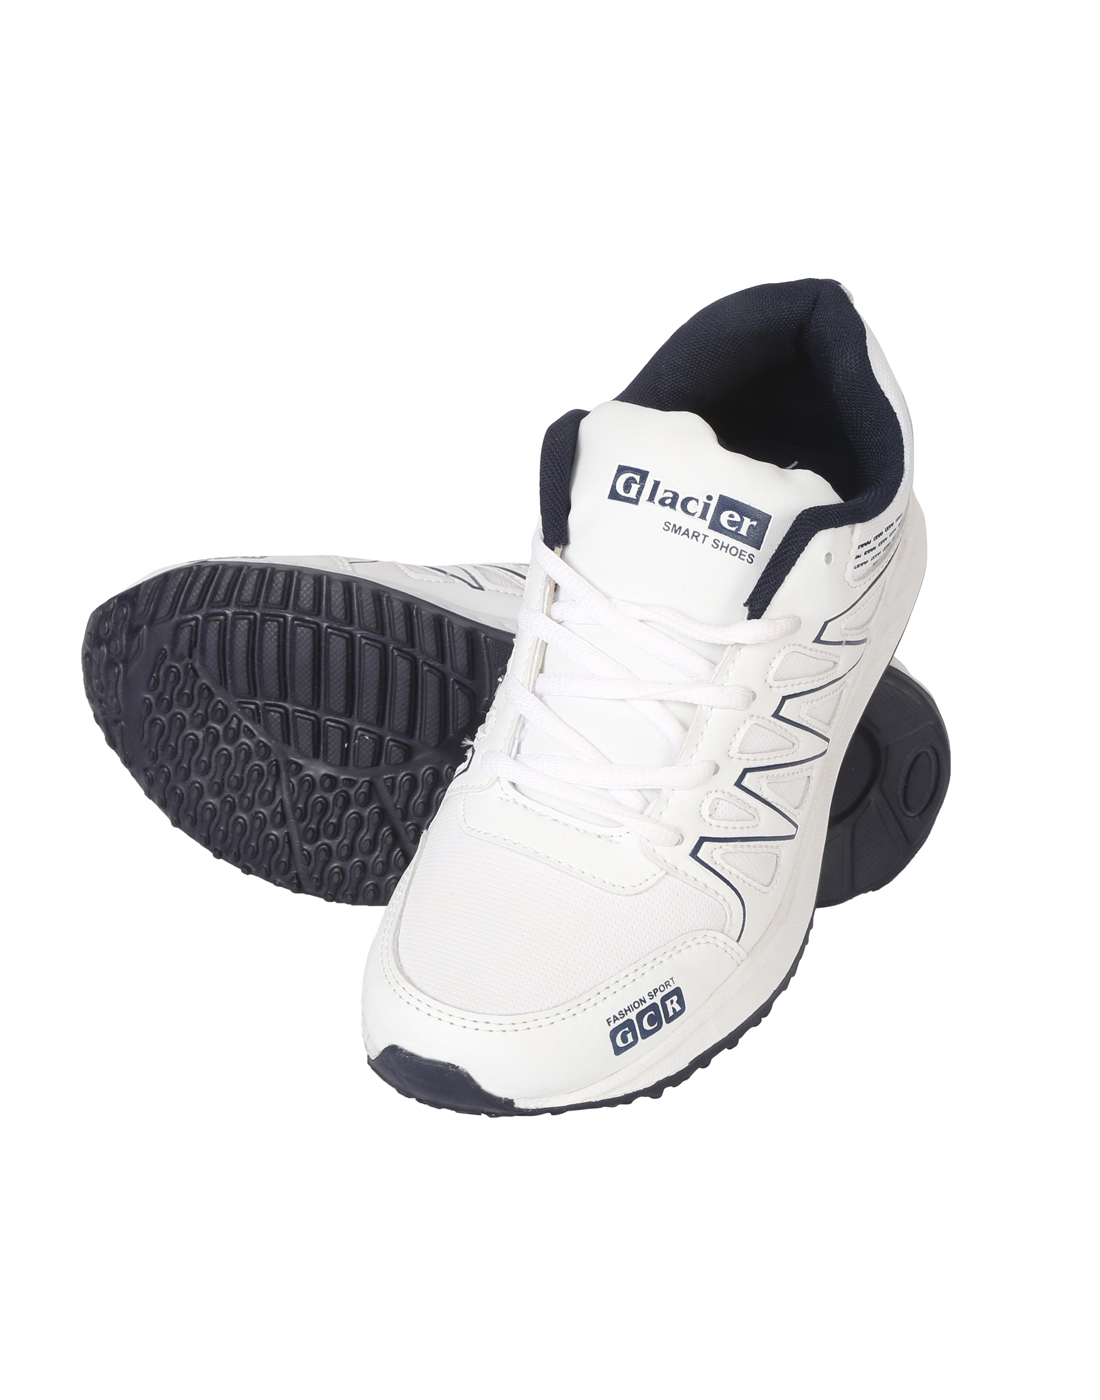 Buy Glacier White Sports Shoes for Men Online @ ₹639 from ShopClues